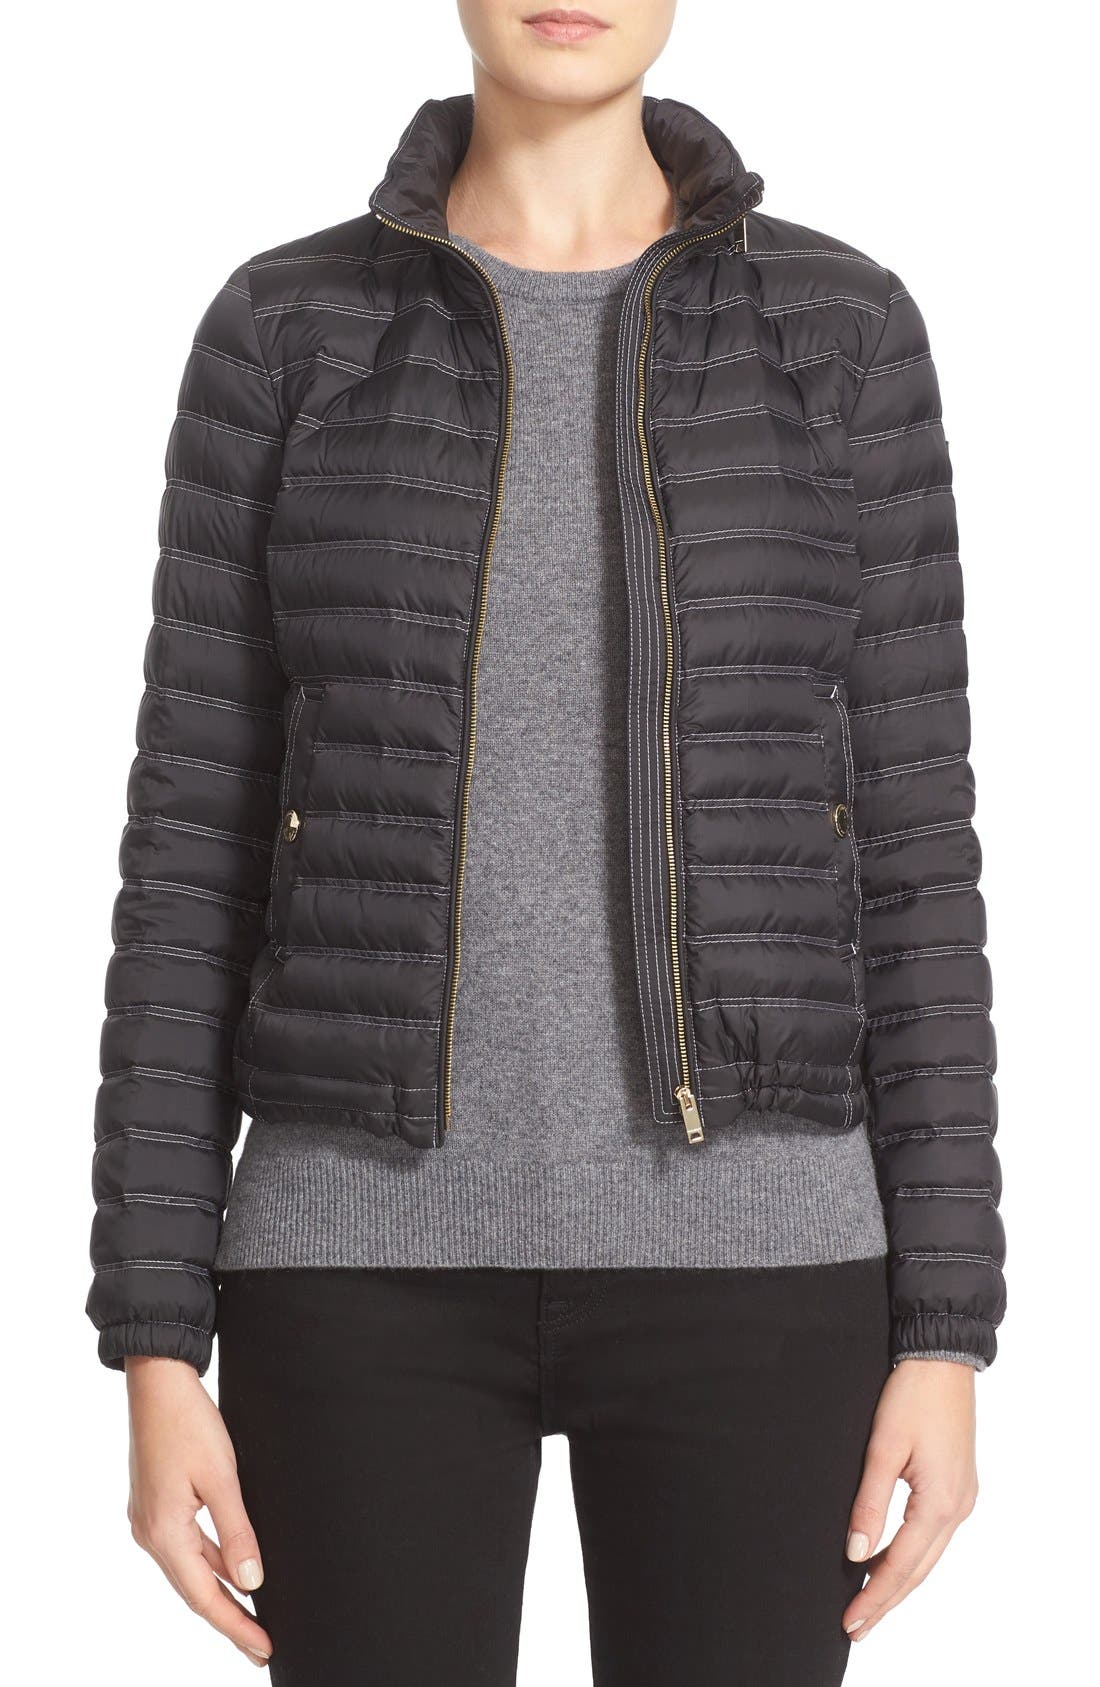 Burberry Jacksdale Packable Down Puffer 